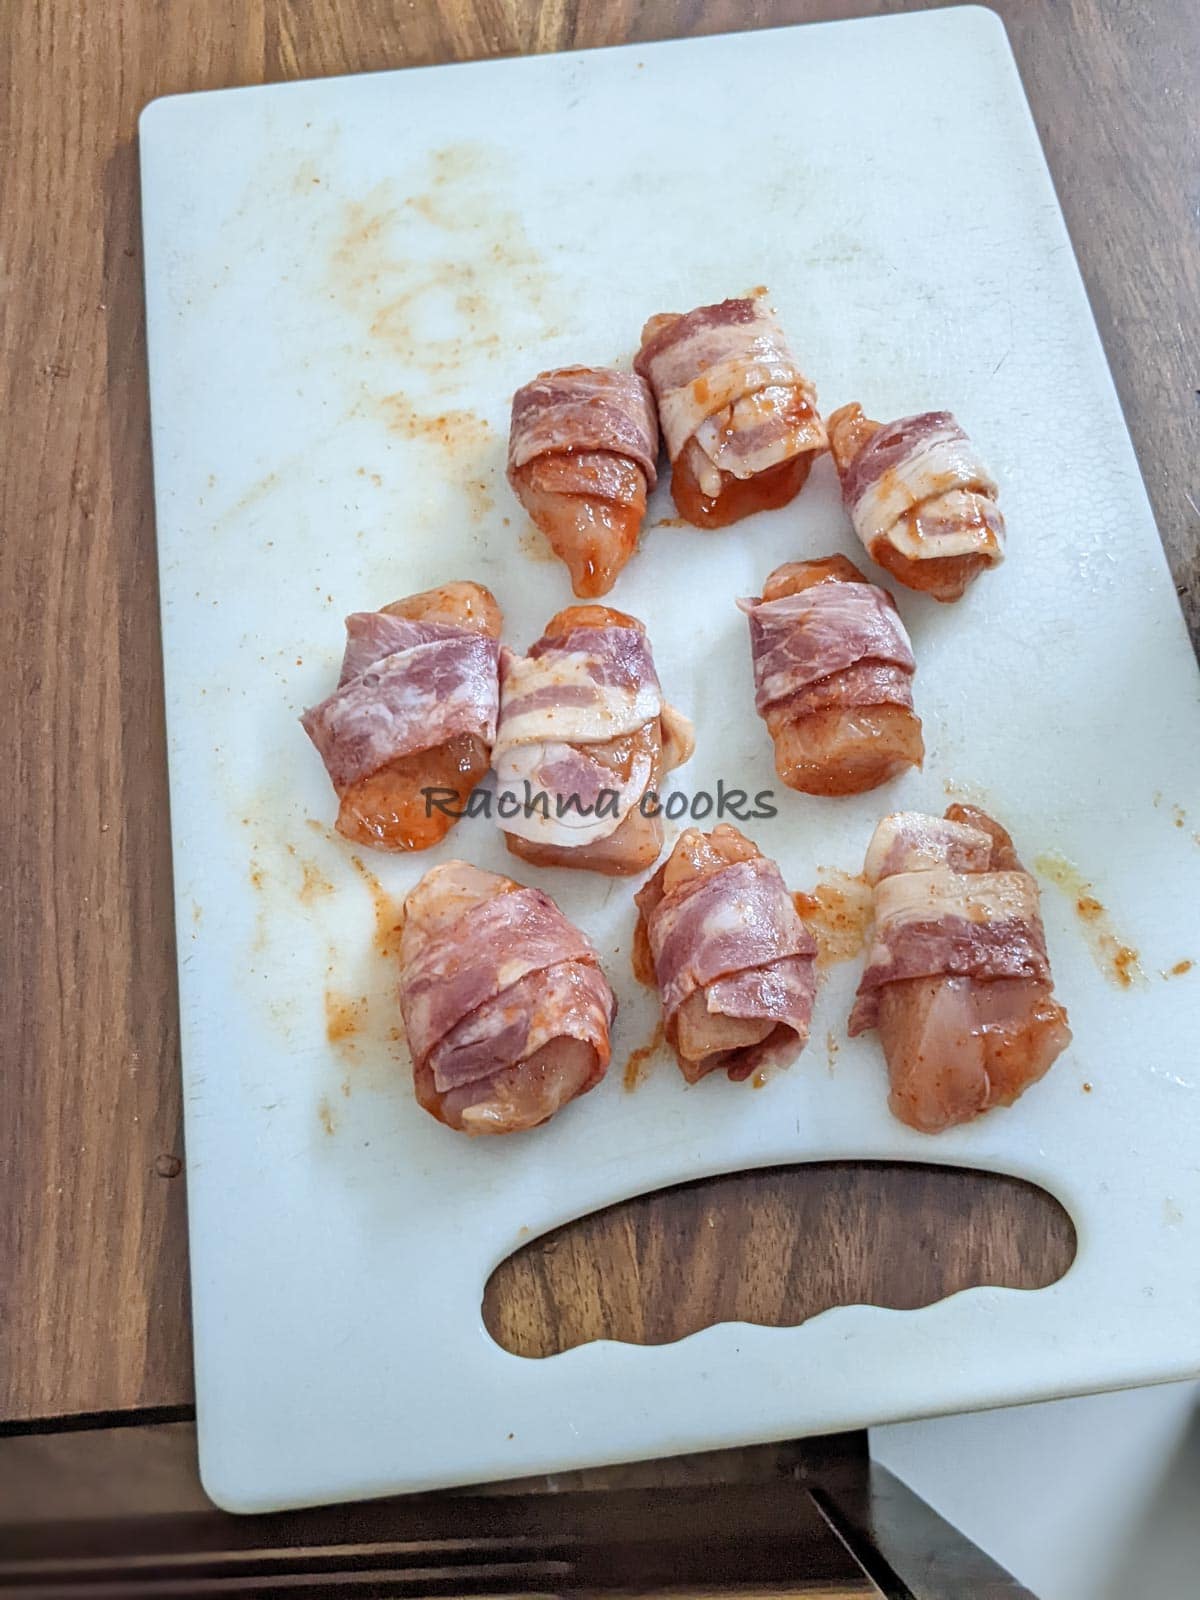 Chicken bites brushed with Sriracha sauce and wrapped with bacon strips on a chopping board.